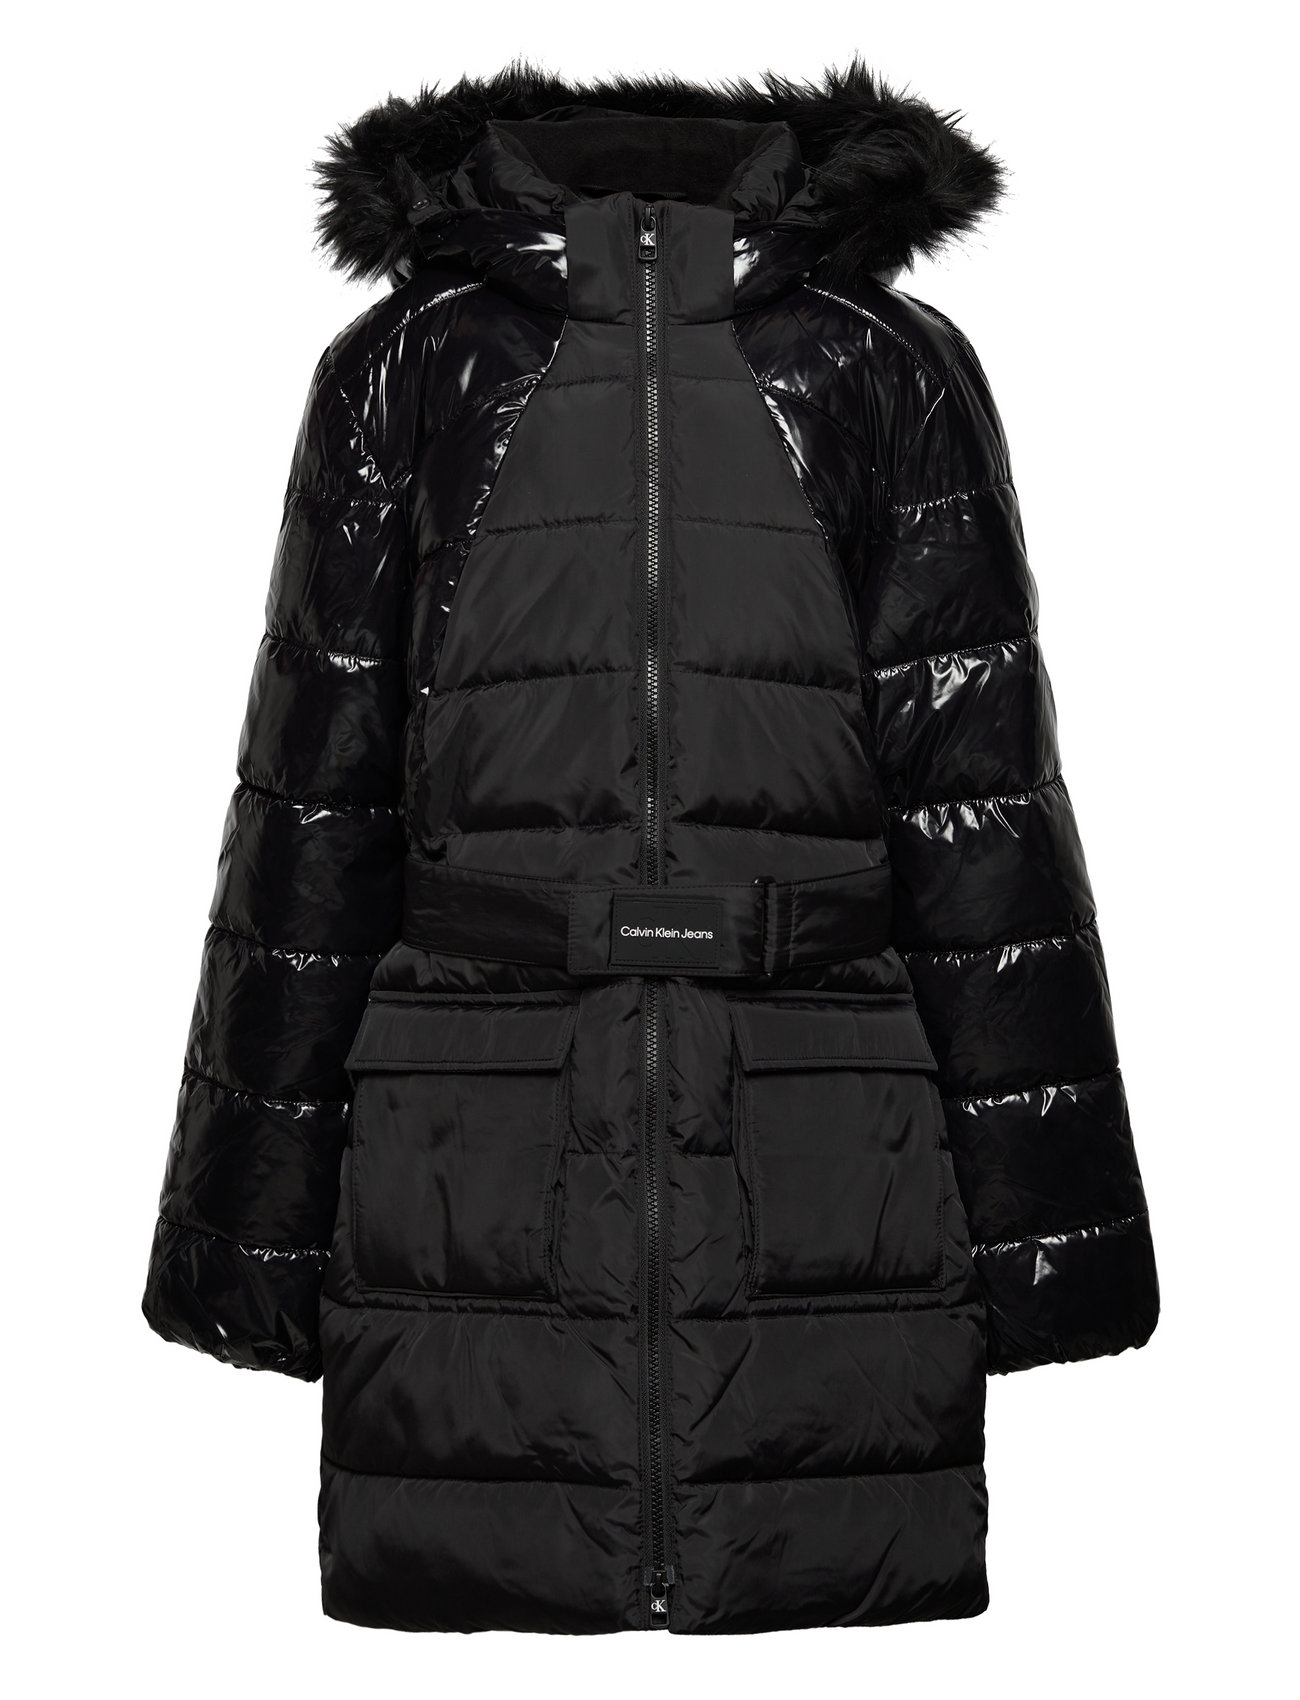 Calvin Klein Mixed Media Belted Puffer Coat  €. Buy Puffer & Padded  from Calvin Klein online at . Fast delivery and easy returns